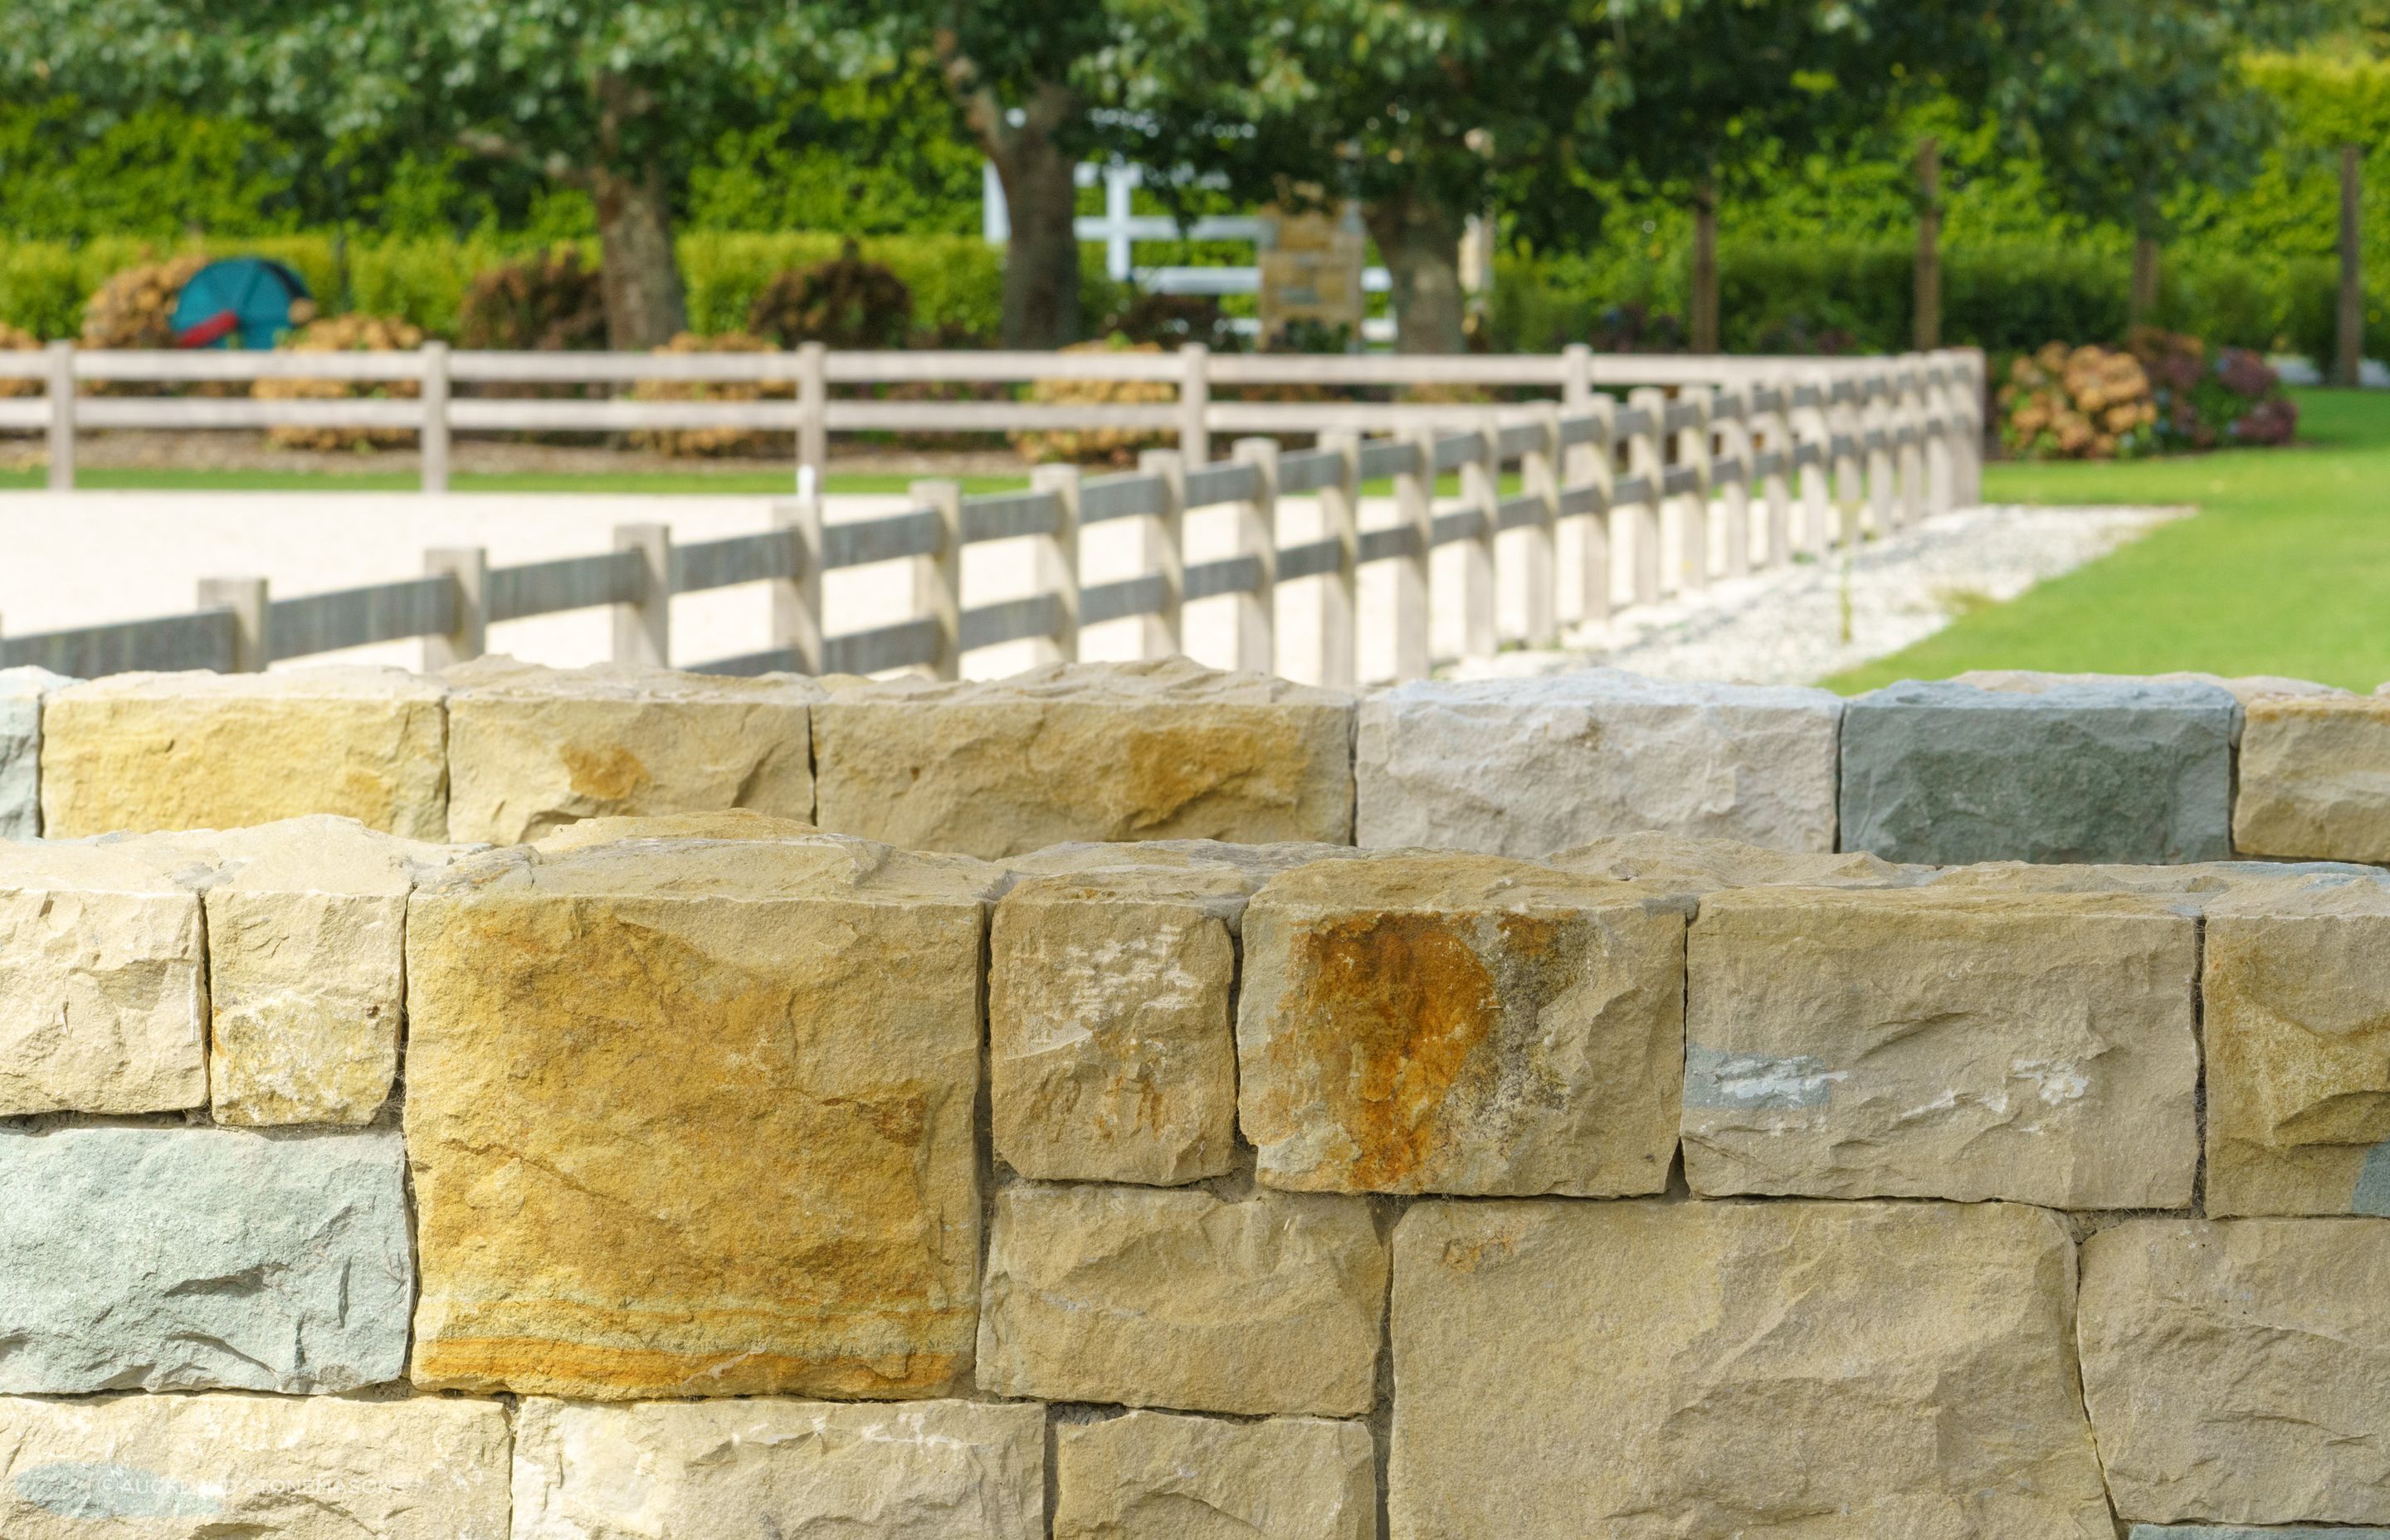 Stone boundary walls like this naturally add beautiful shades and textures to a property.